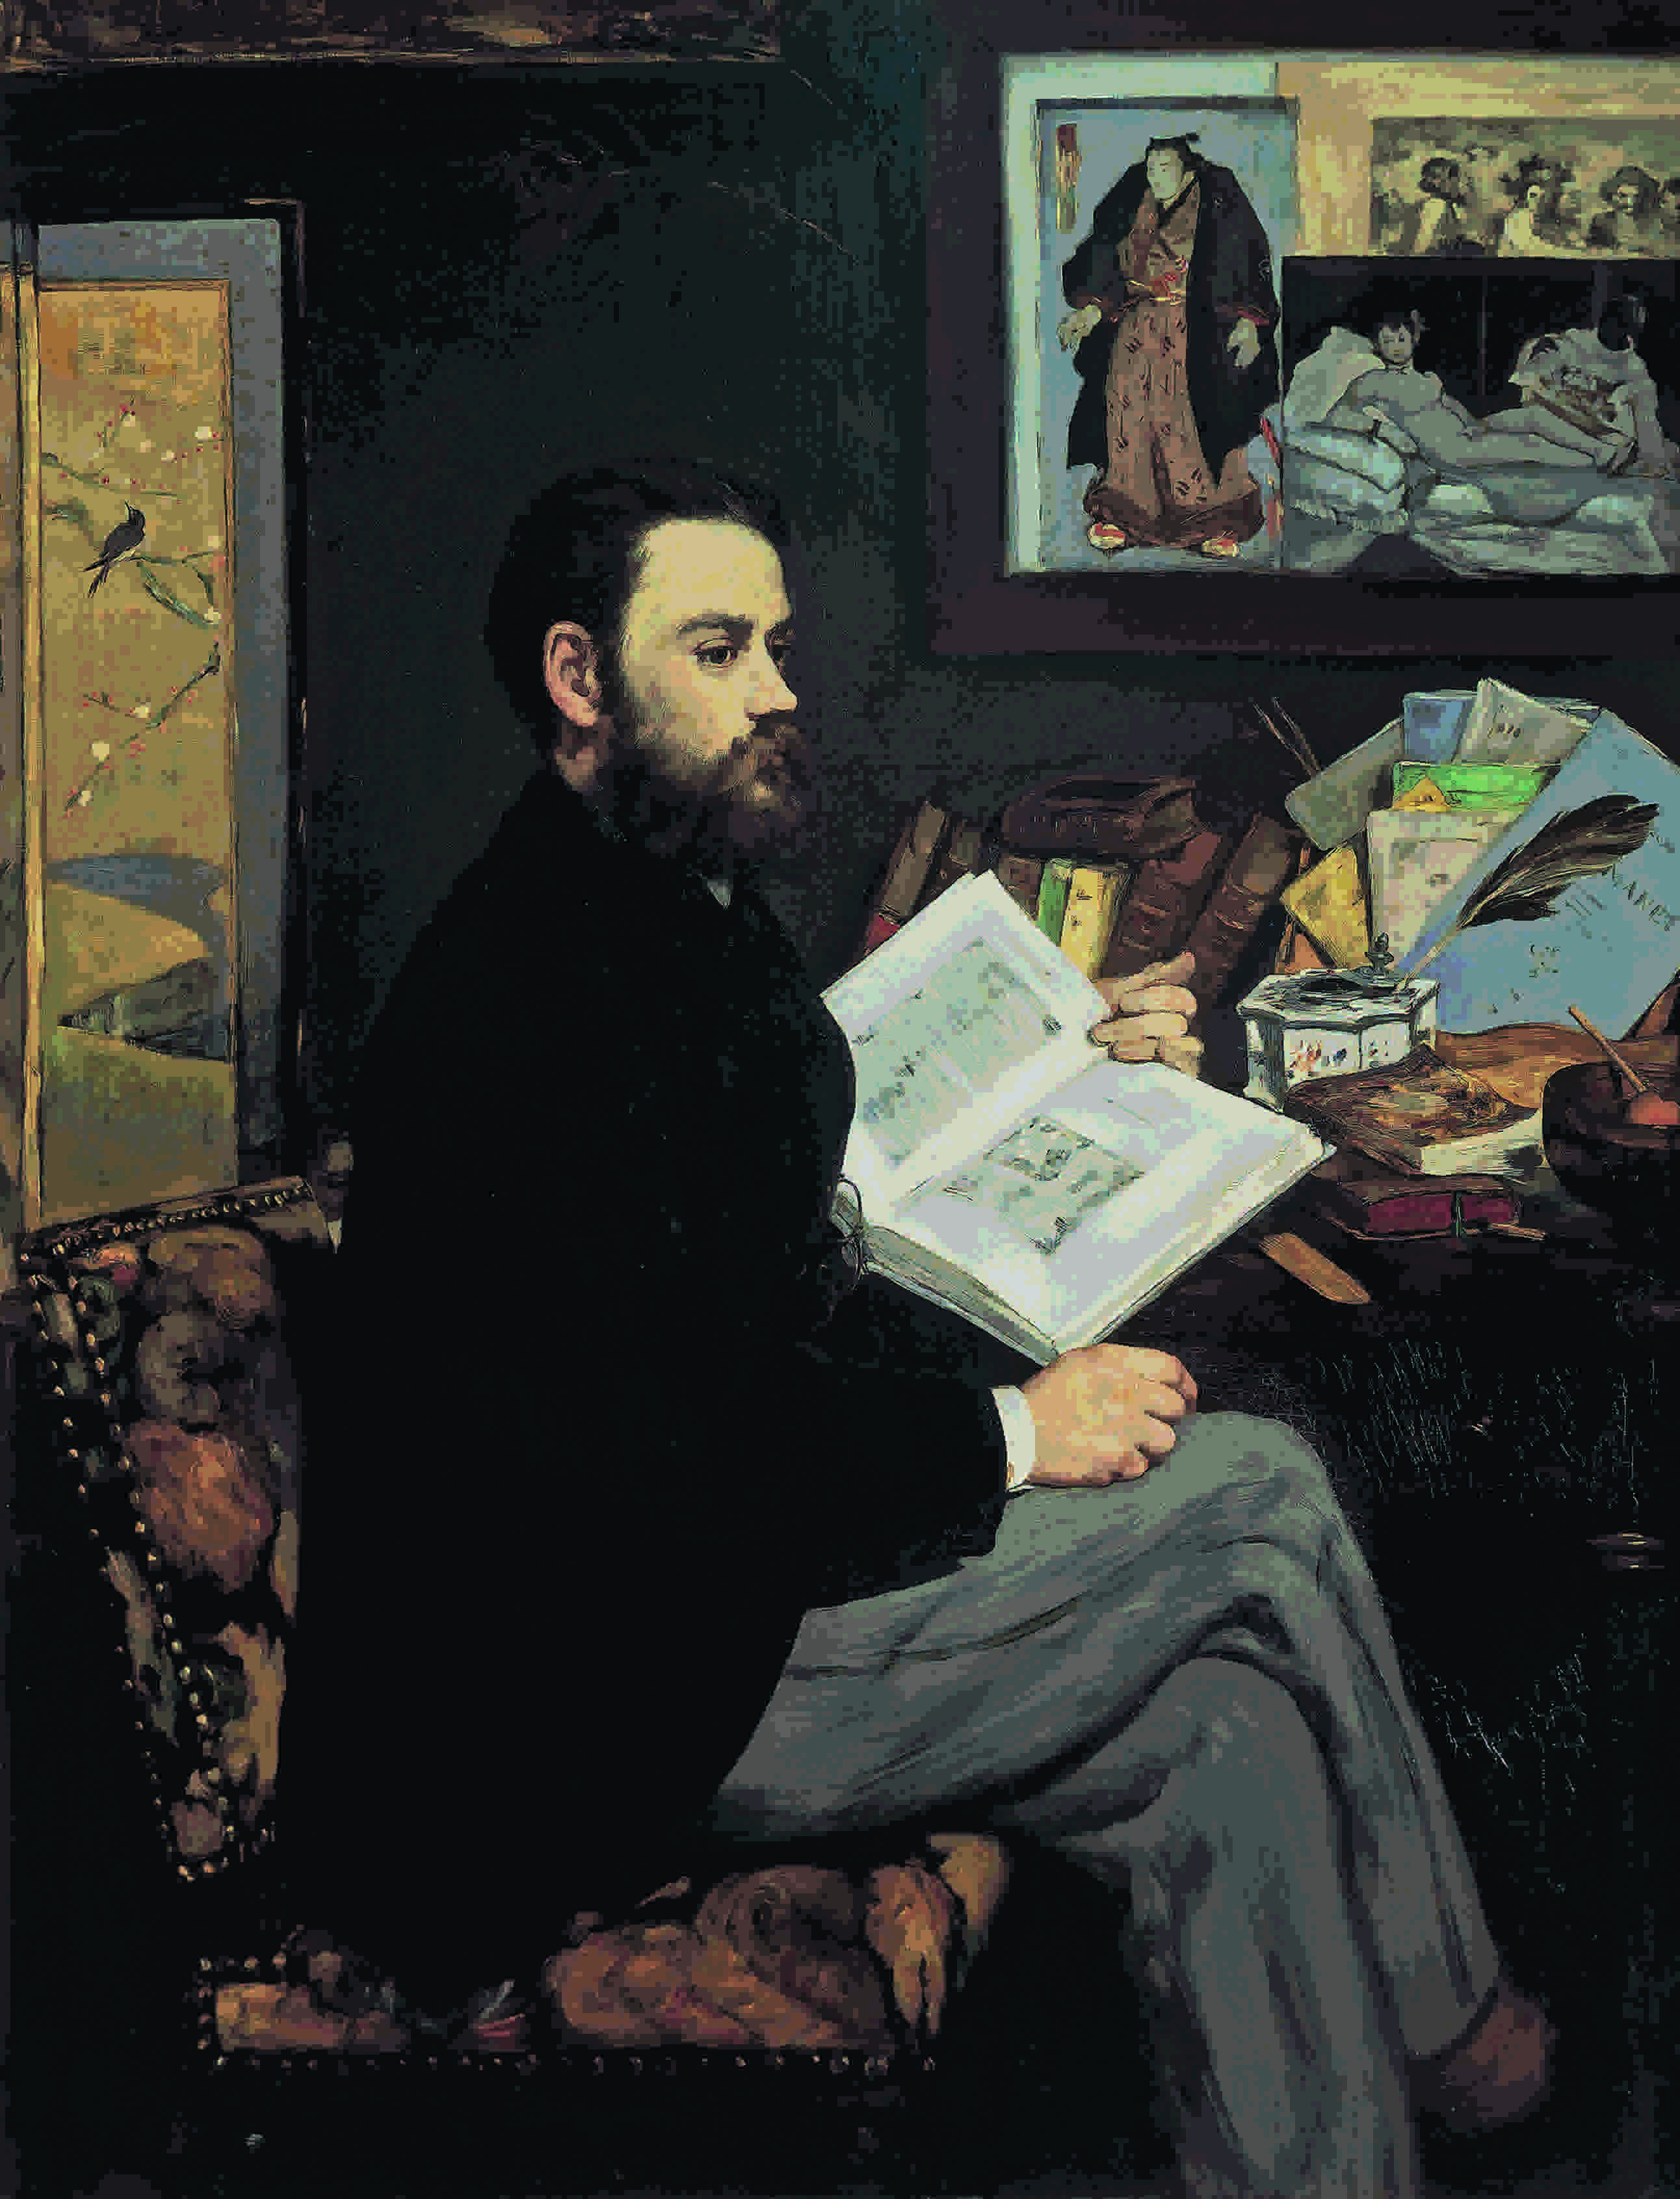 Portrait of Emile Zola (1840-1902), 1868, by Edouard Manet (1832-1883), oil on canvas, 146×114 cm. (Photo by DeAgostini/Getty Images)